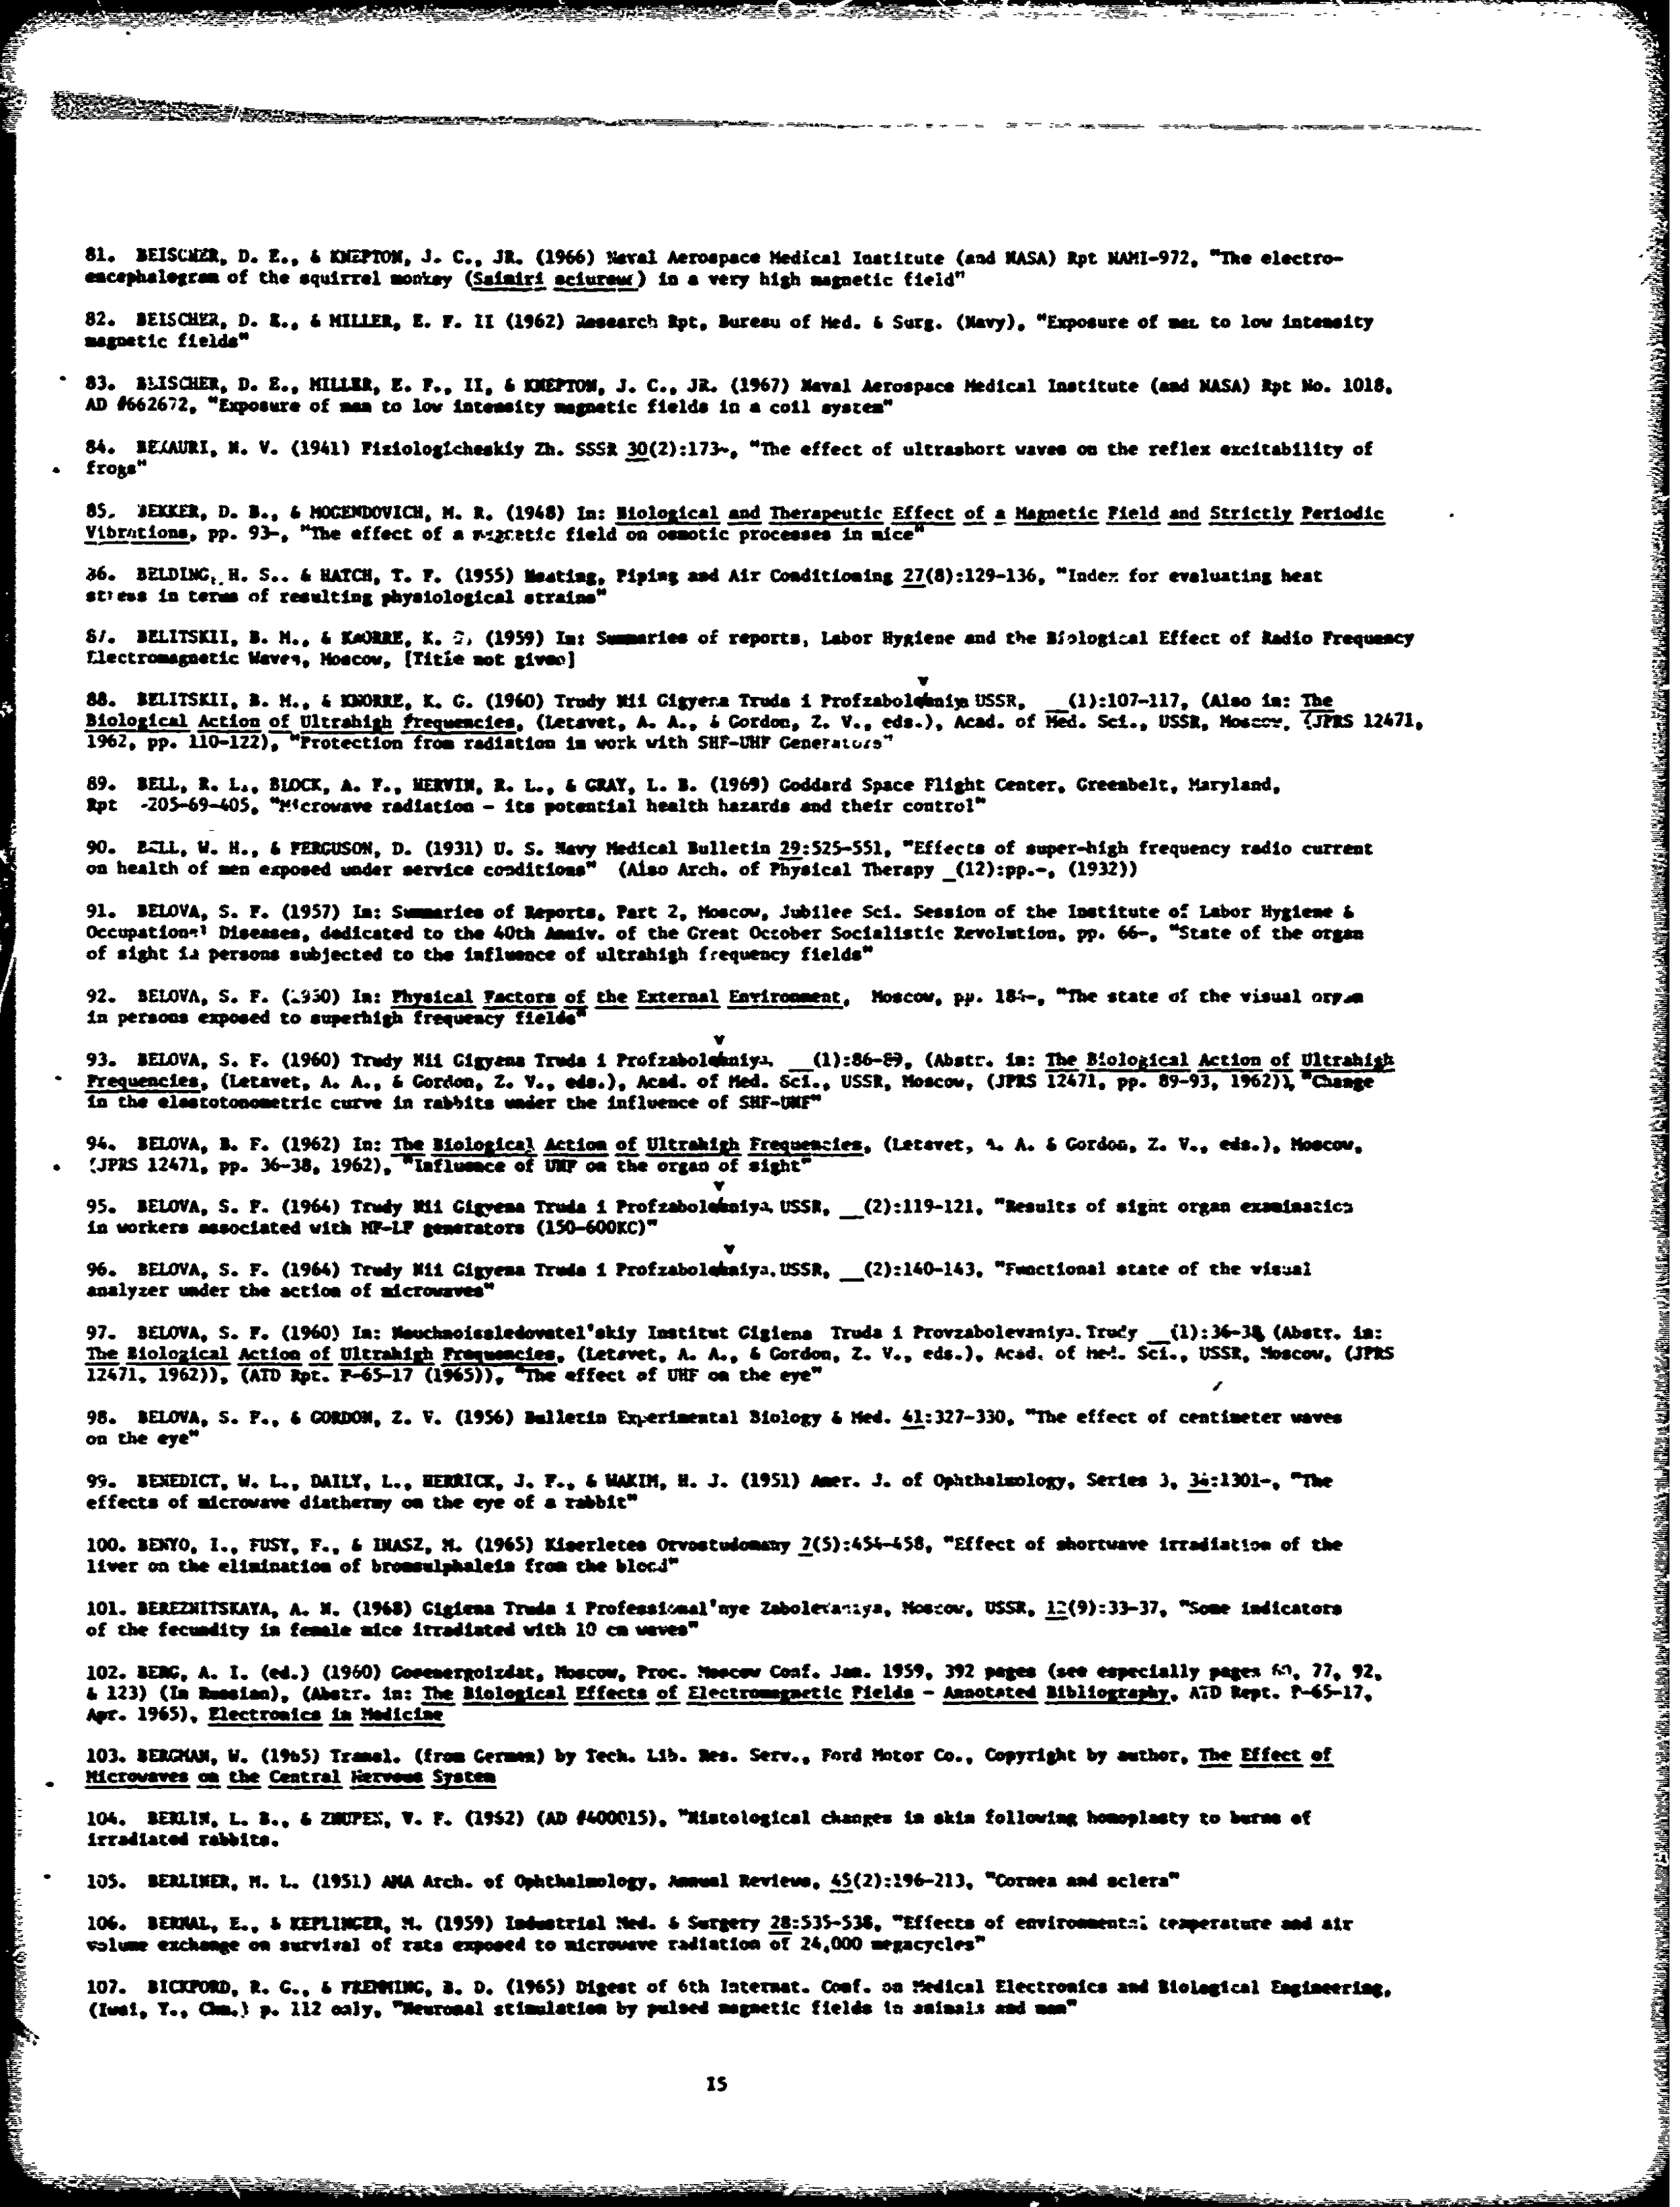 BIBLIOGRAPHY_OF_REPORTED_BIOLOGICAL_PHENOMENA_'EFFECTS'_AND_CLINICAL_Page_18.png